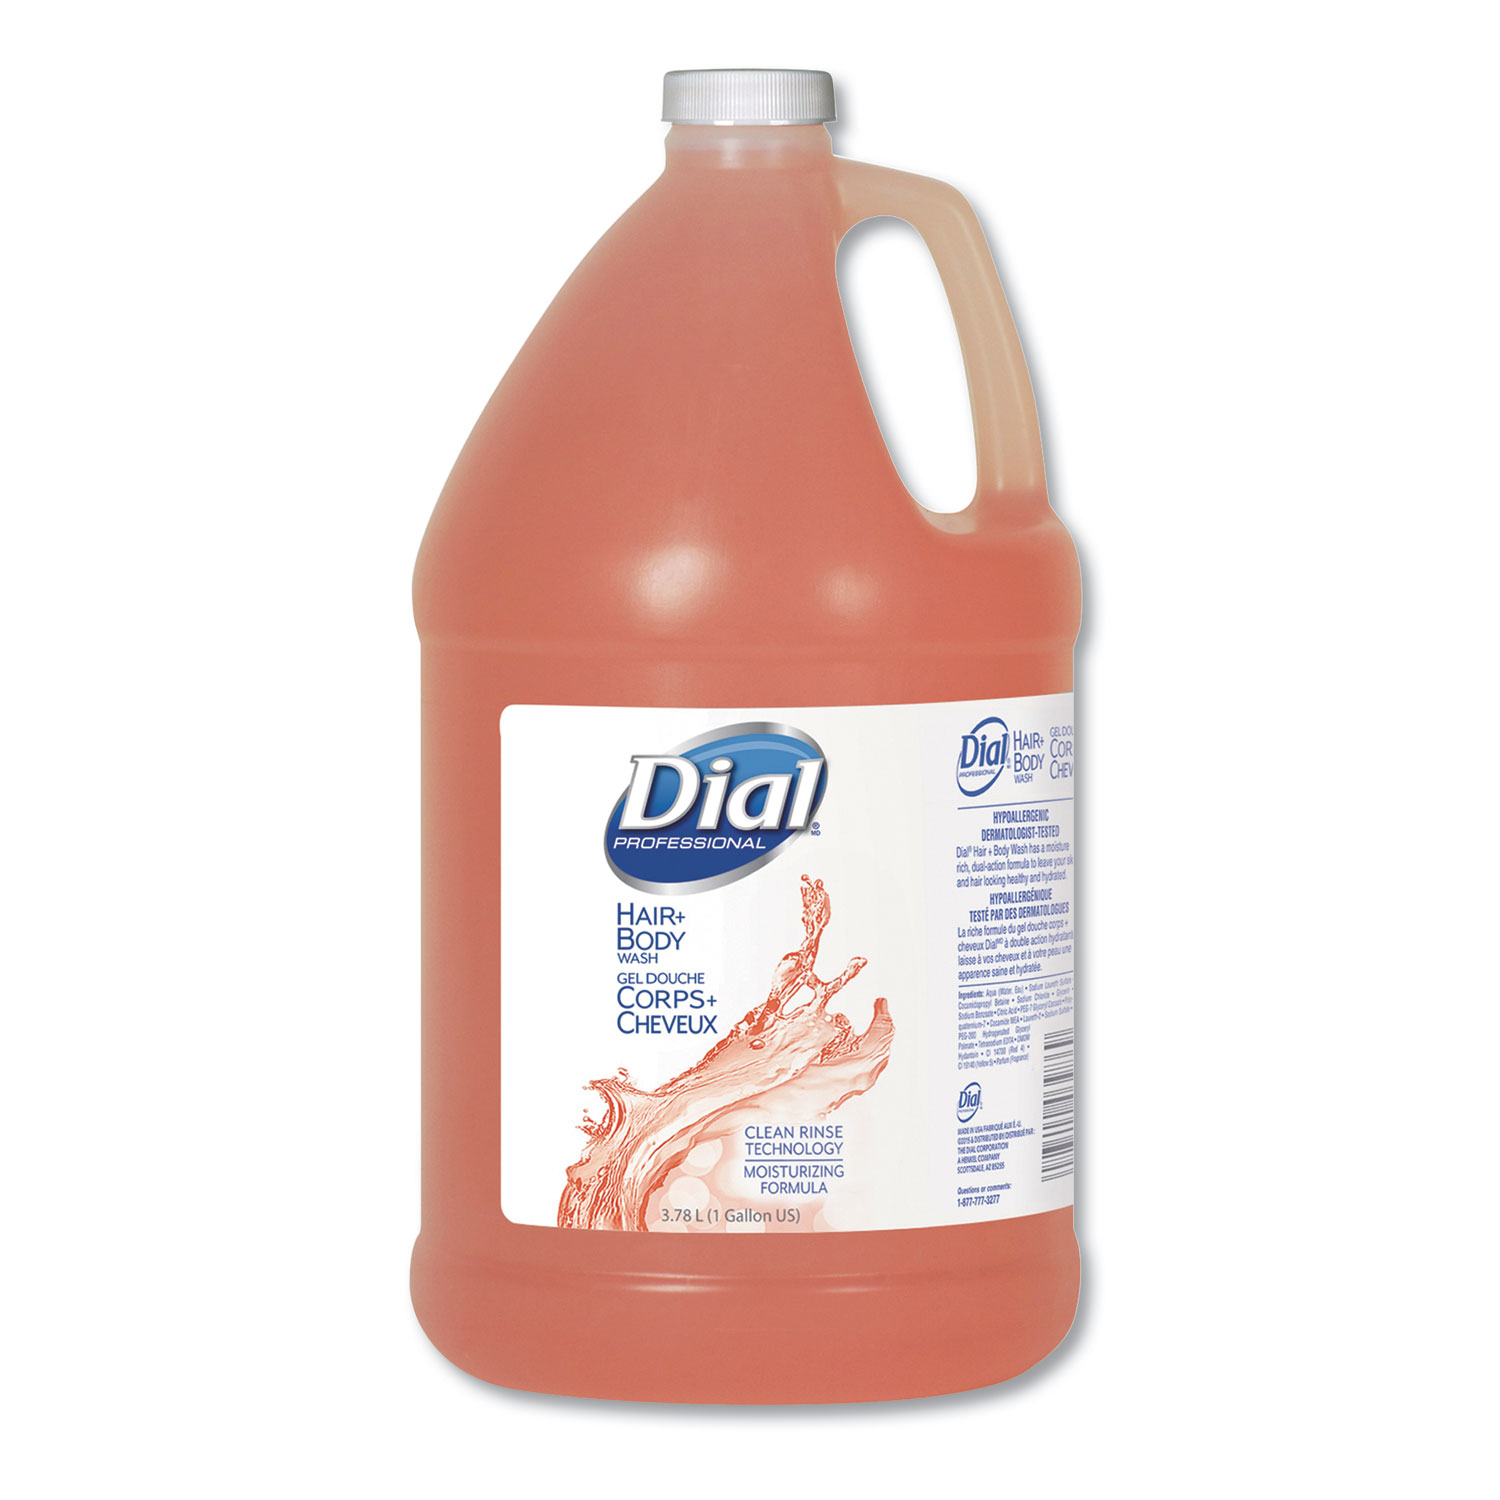  Dial Professional 03986 Body and Hair Care, 1 gal Bottle, Gender-Neutral Peach Scent, 4/Carton (DIA03986) 